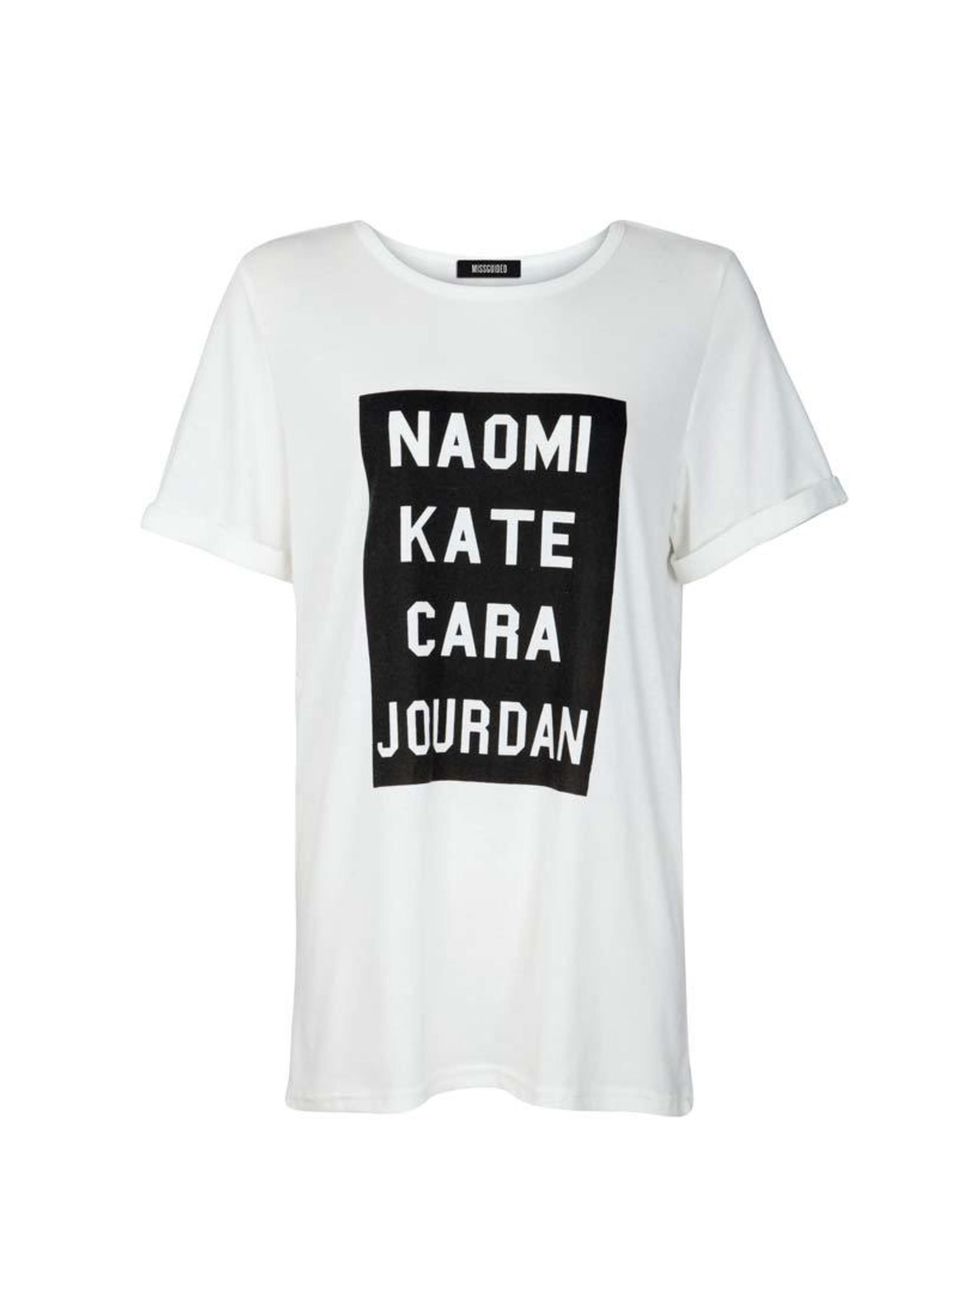 <p>Jourdan Dunn has been <a href="http://www.elleuk.com/fashion/celebrity-style/london-fashion-week-spring-summer-2015-front-row#image=10" target="_blank">spotted out in this tee</a> - so Digital Director Phebe Hunnicutt is in good company.</p>

<p> </p>
